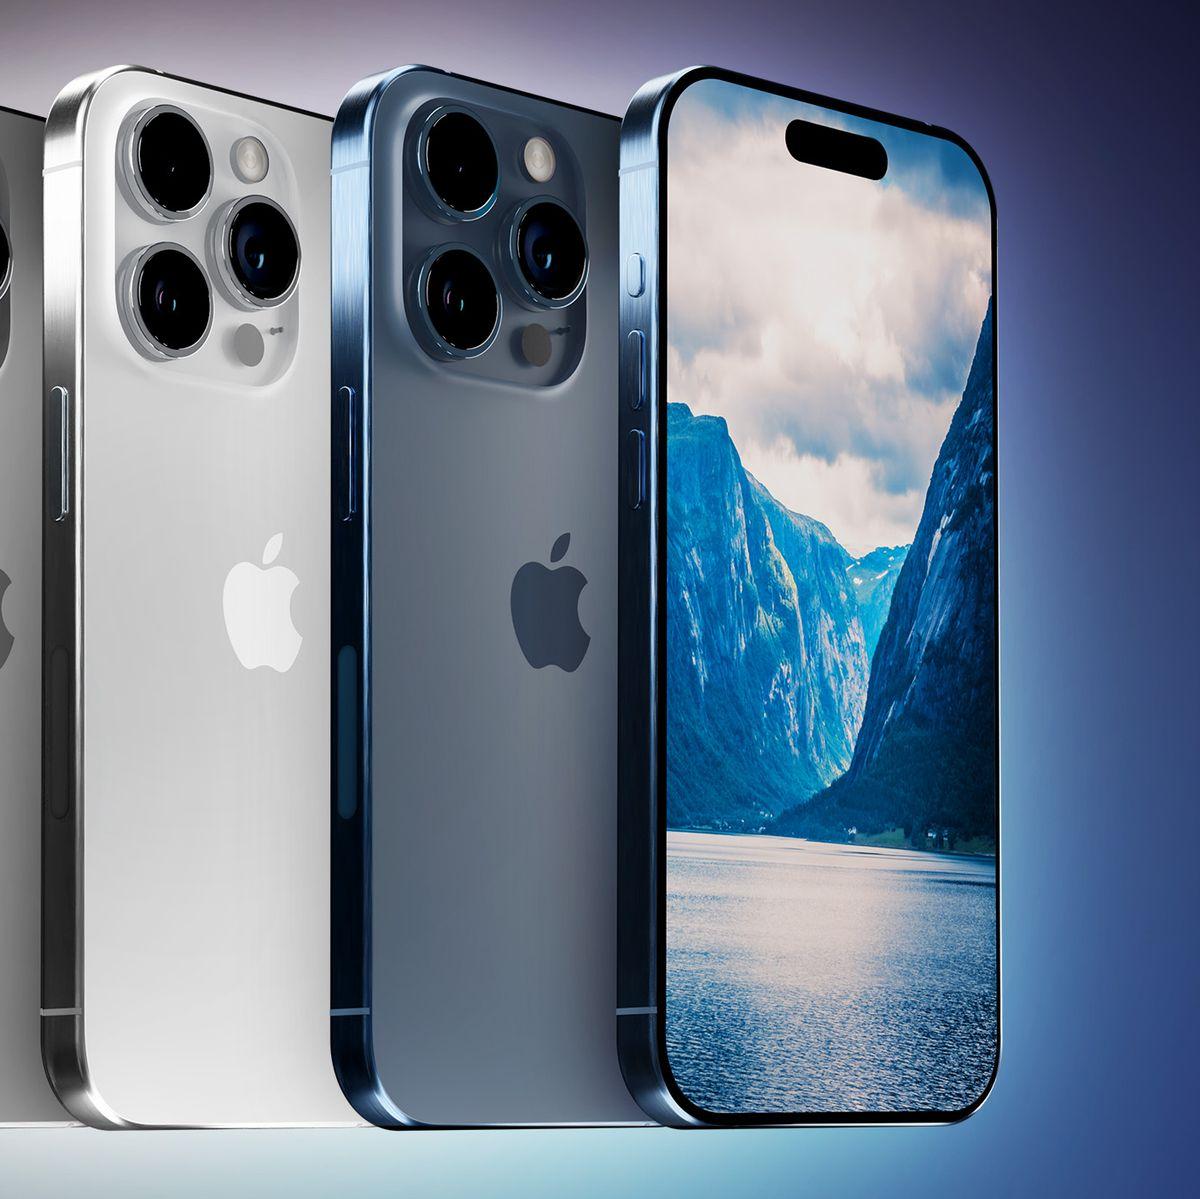 Major Price Hike Again Rumored For iPhone Pro Models